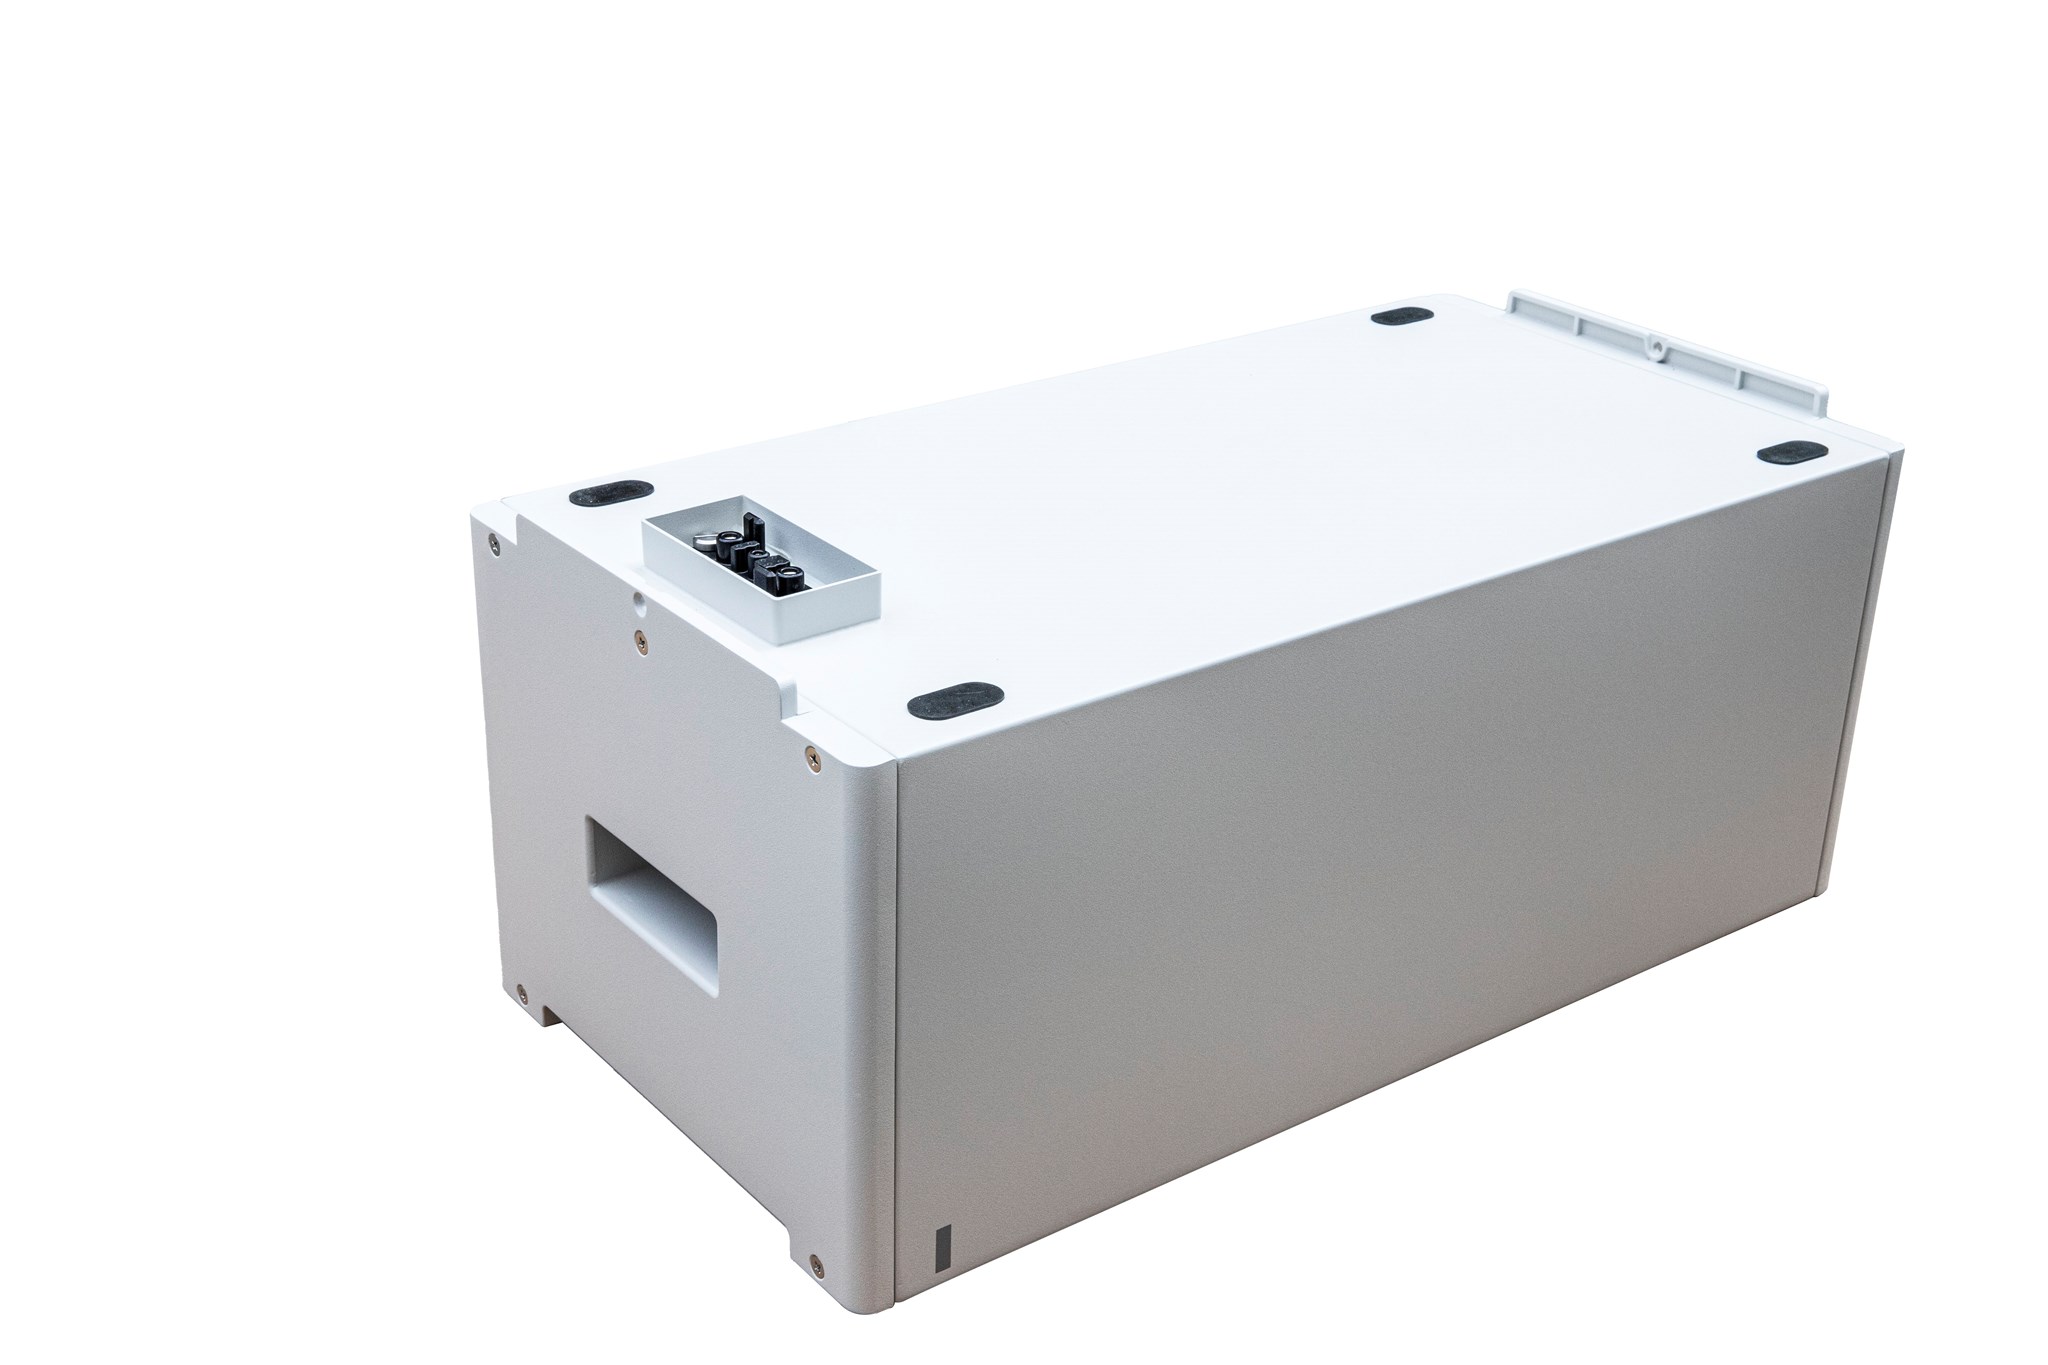 Picture of BYD Battery-Box Premium HVS single module 2.56 kW/h (PV battery storage)